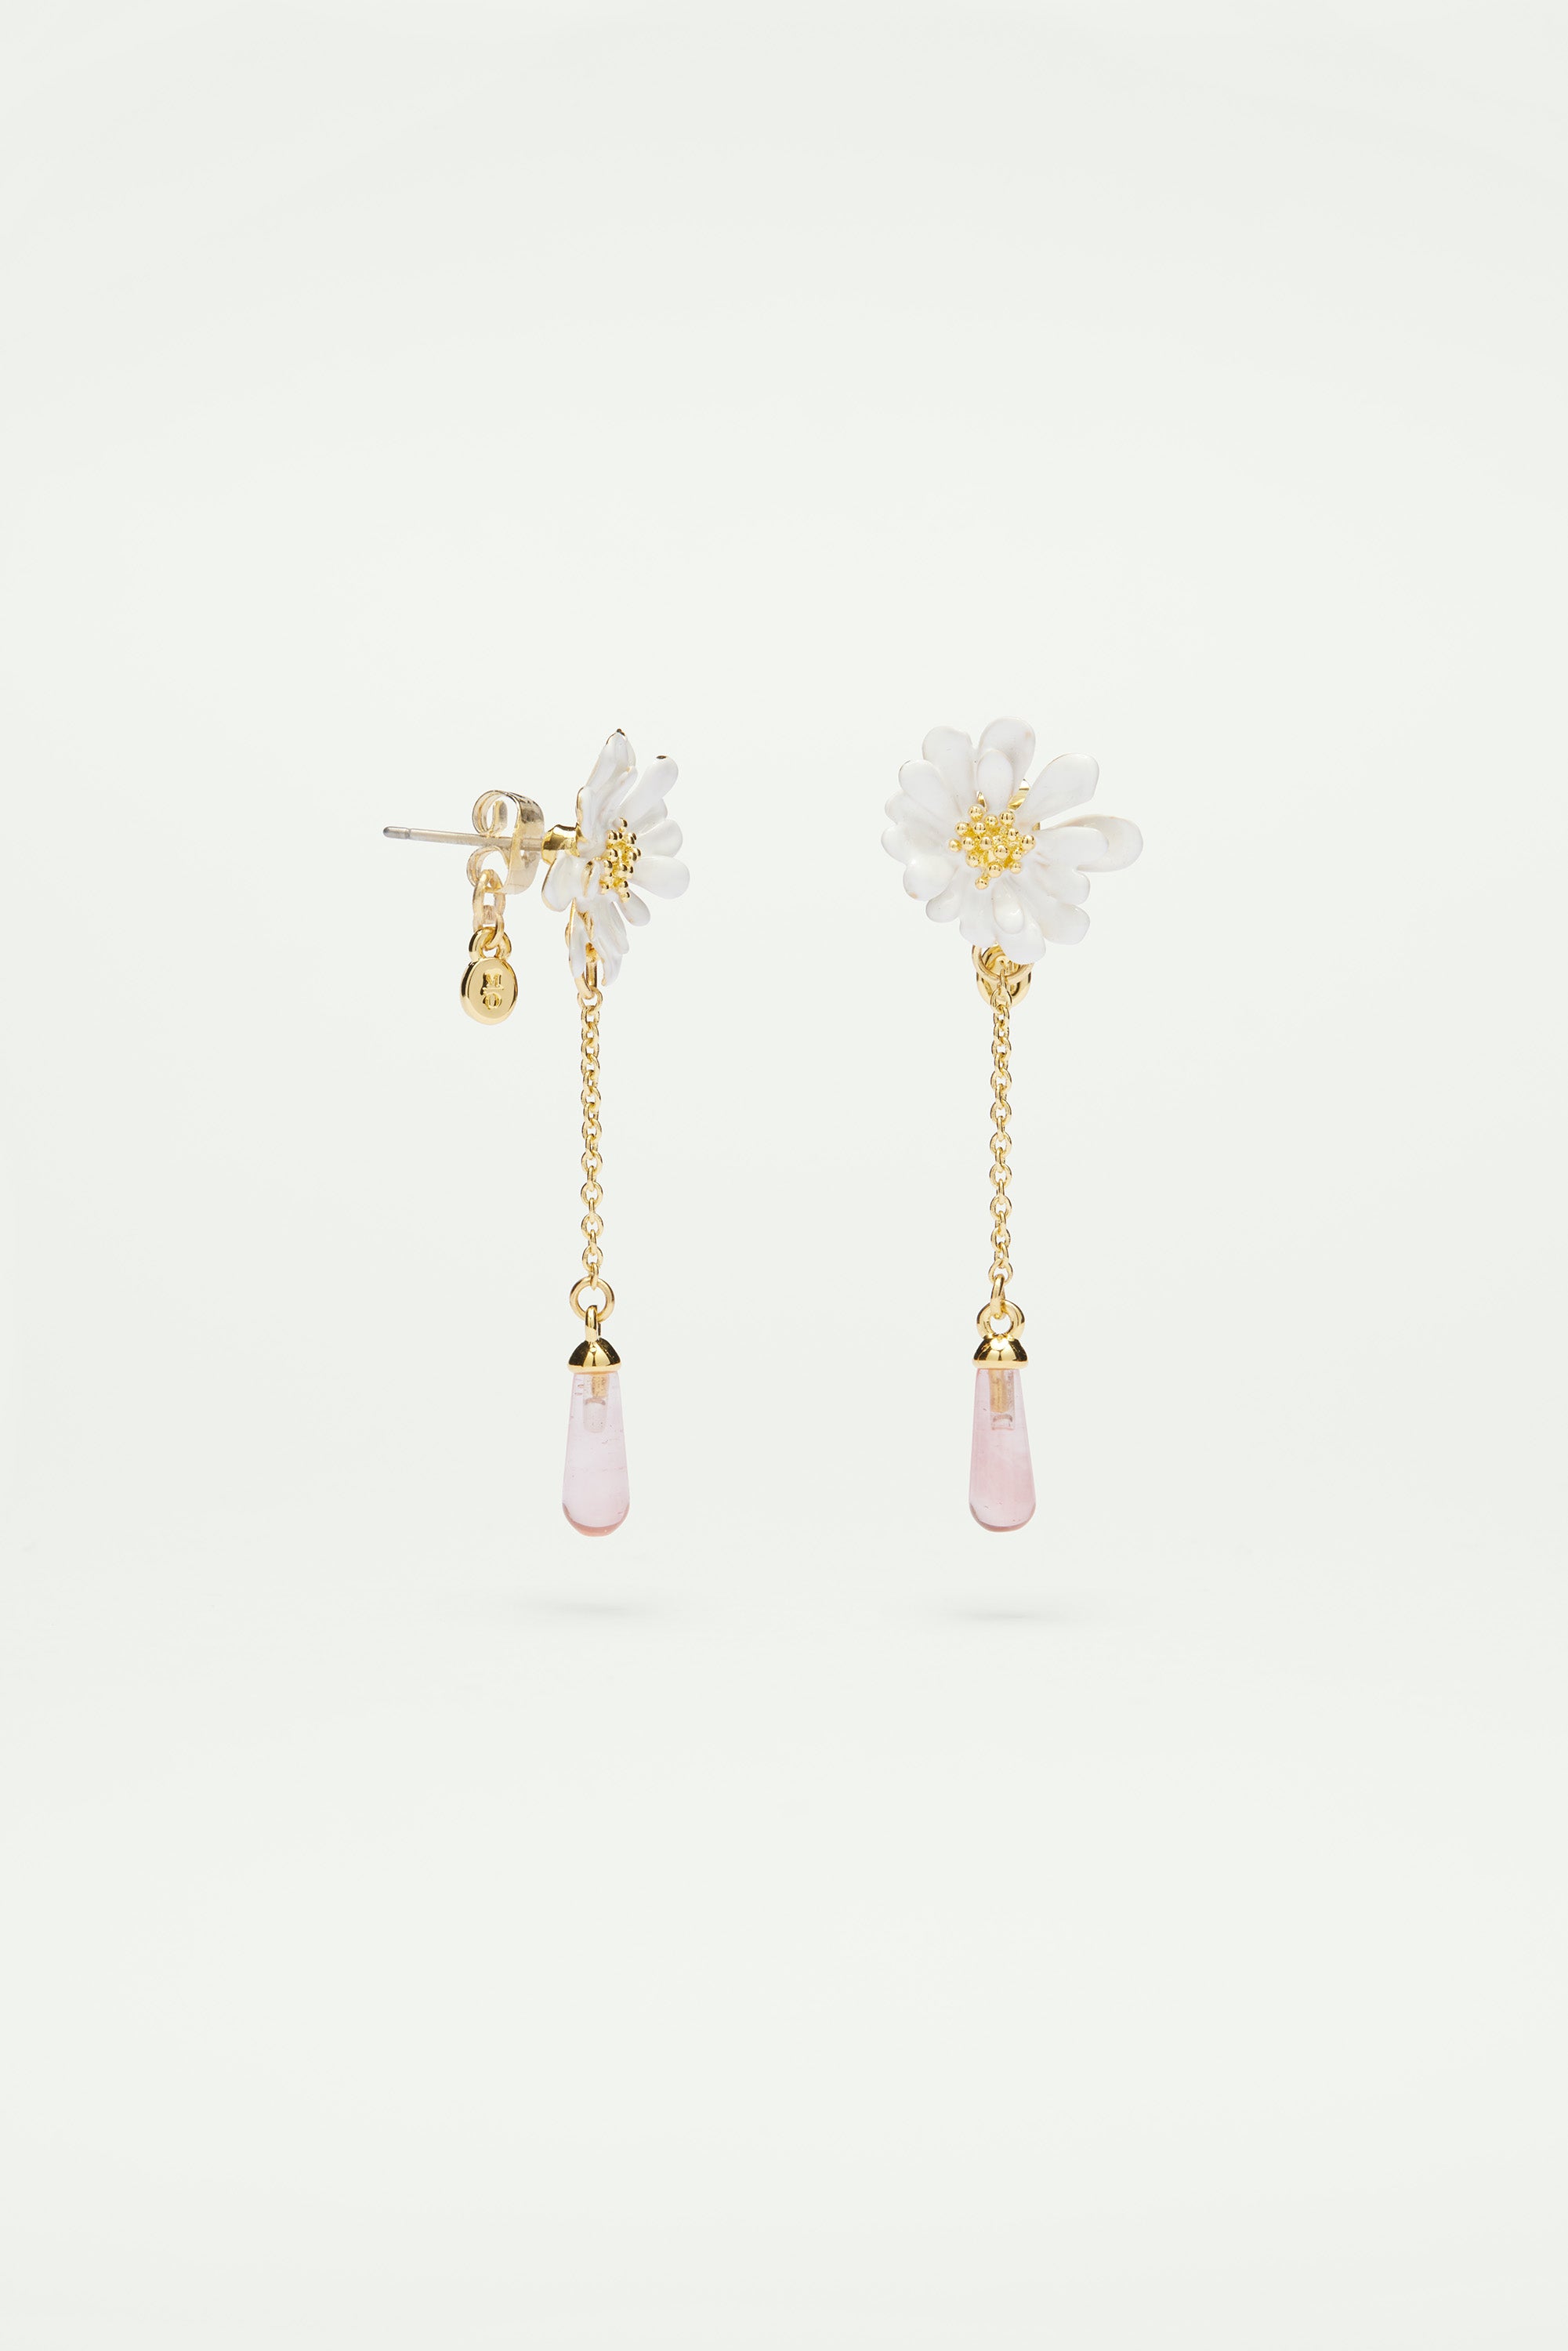 White flower and pink pearl post earrings